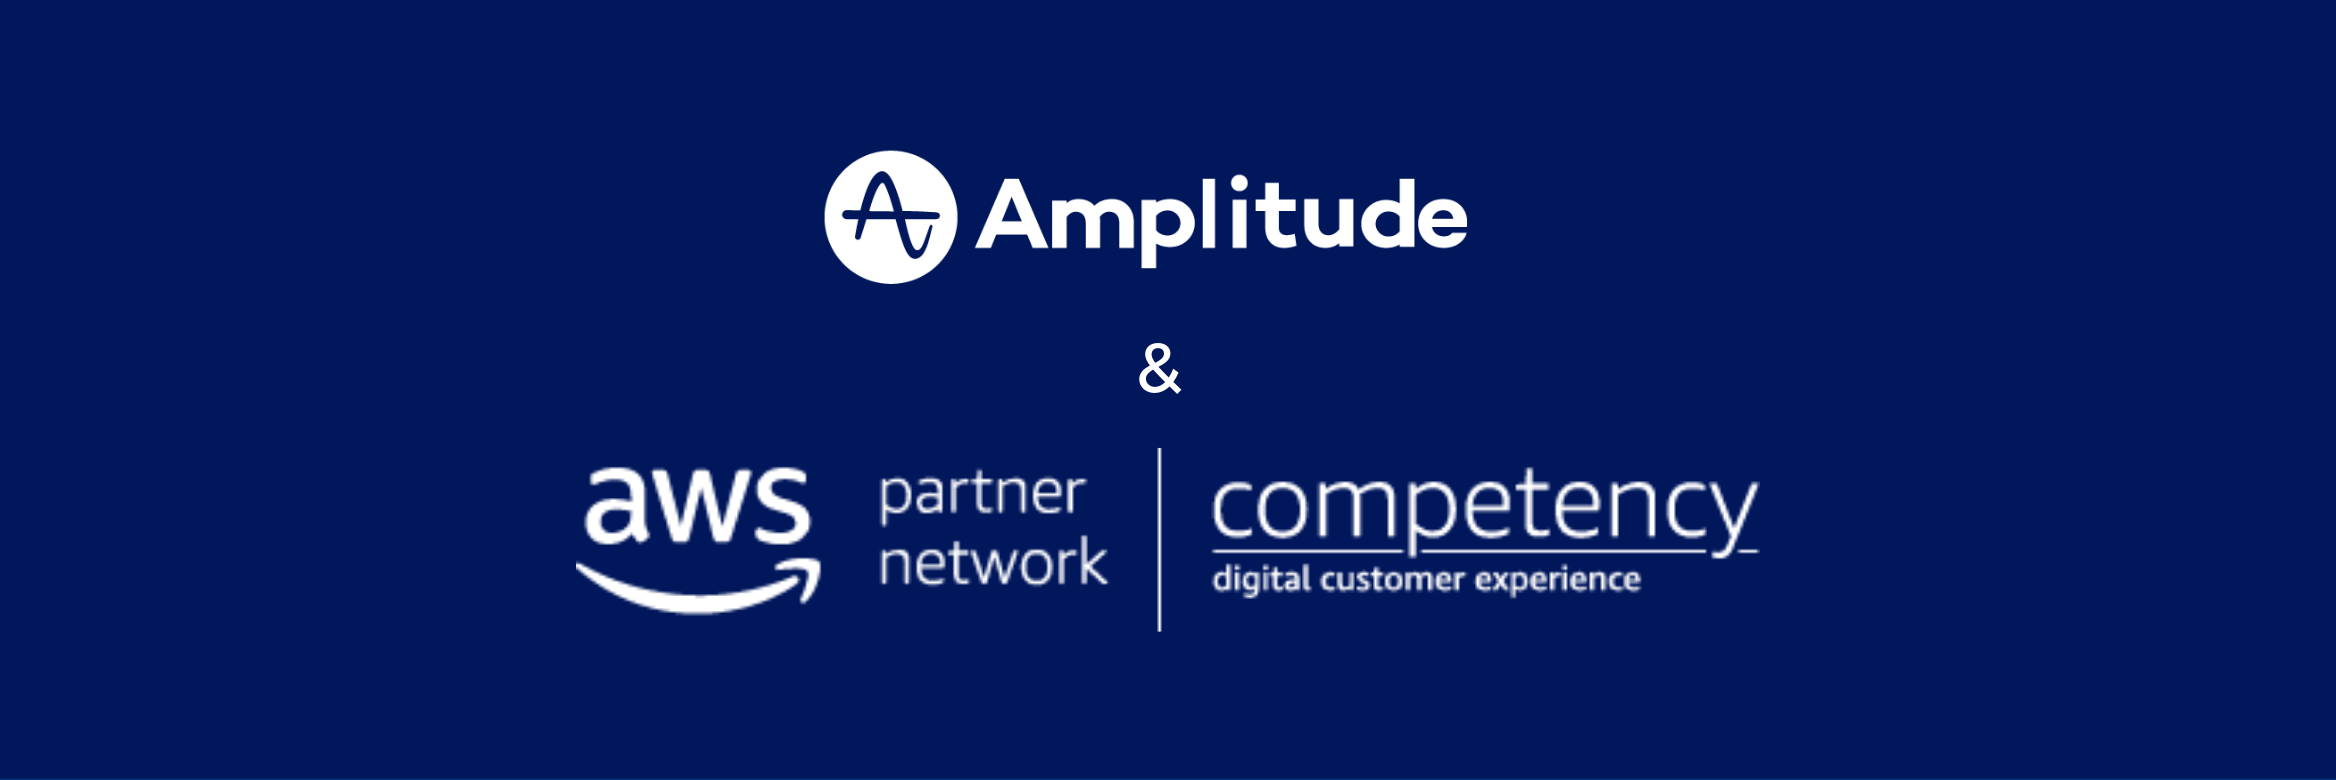 Amplitude is a Launch Partner for the AWS Digital Customer Experience Competency Program